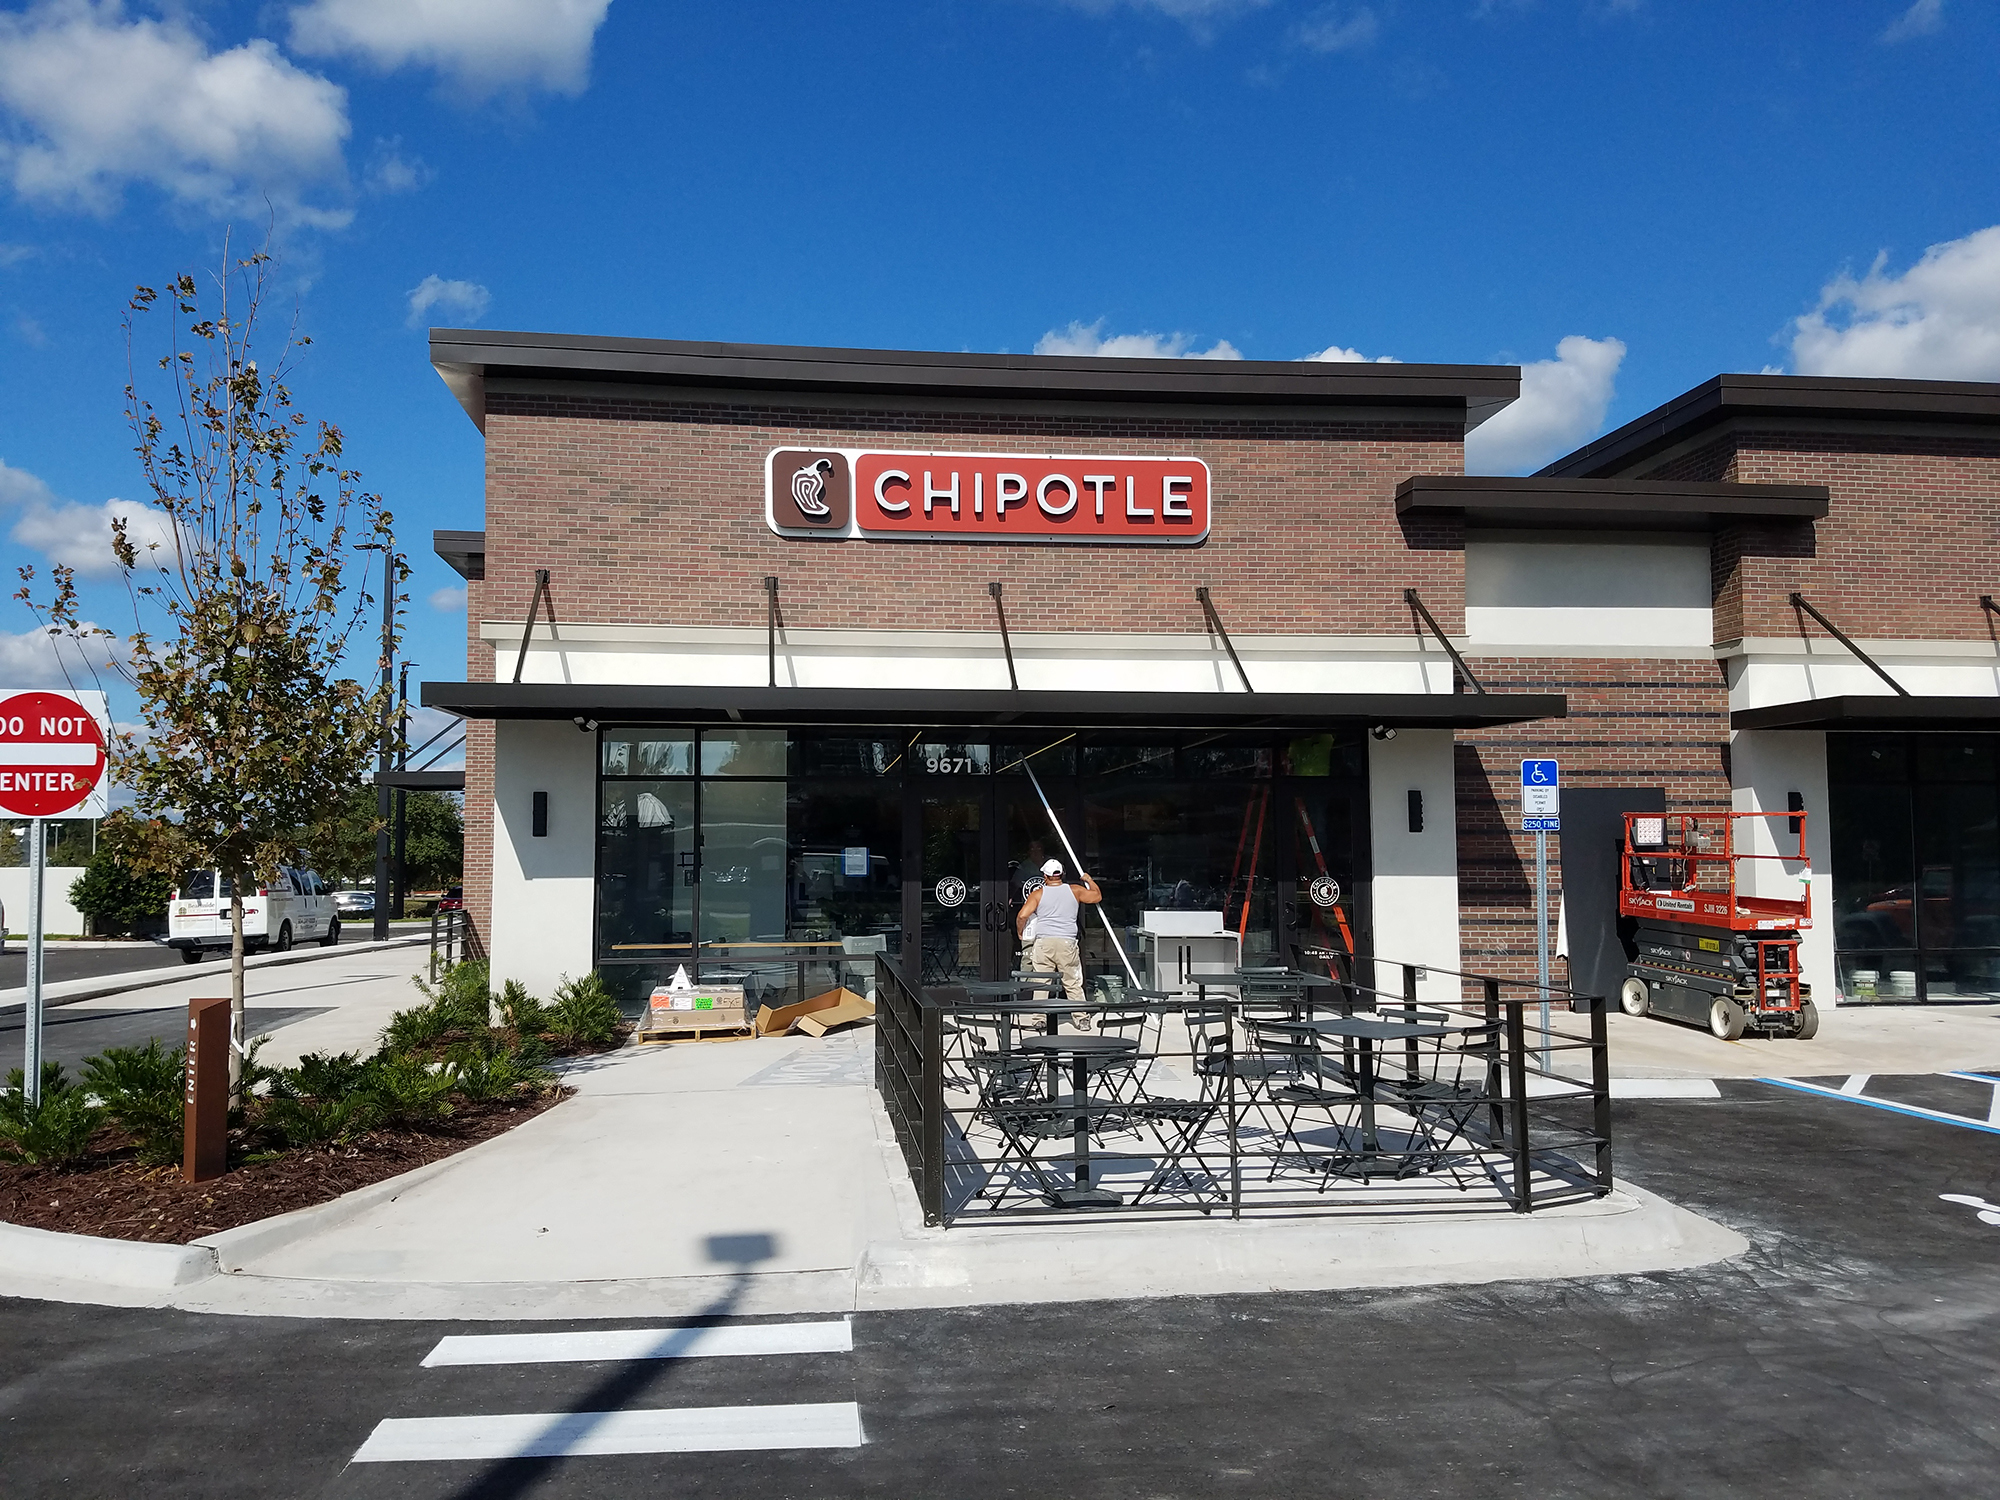 The Oakleaf Chipotle features an outdoor seating area in the front.